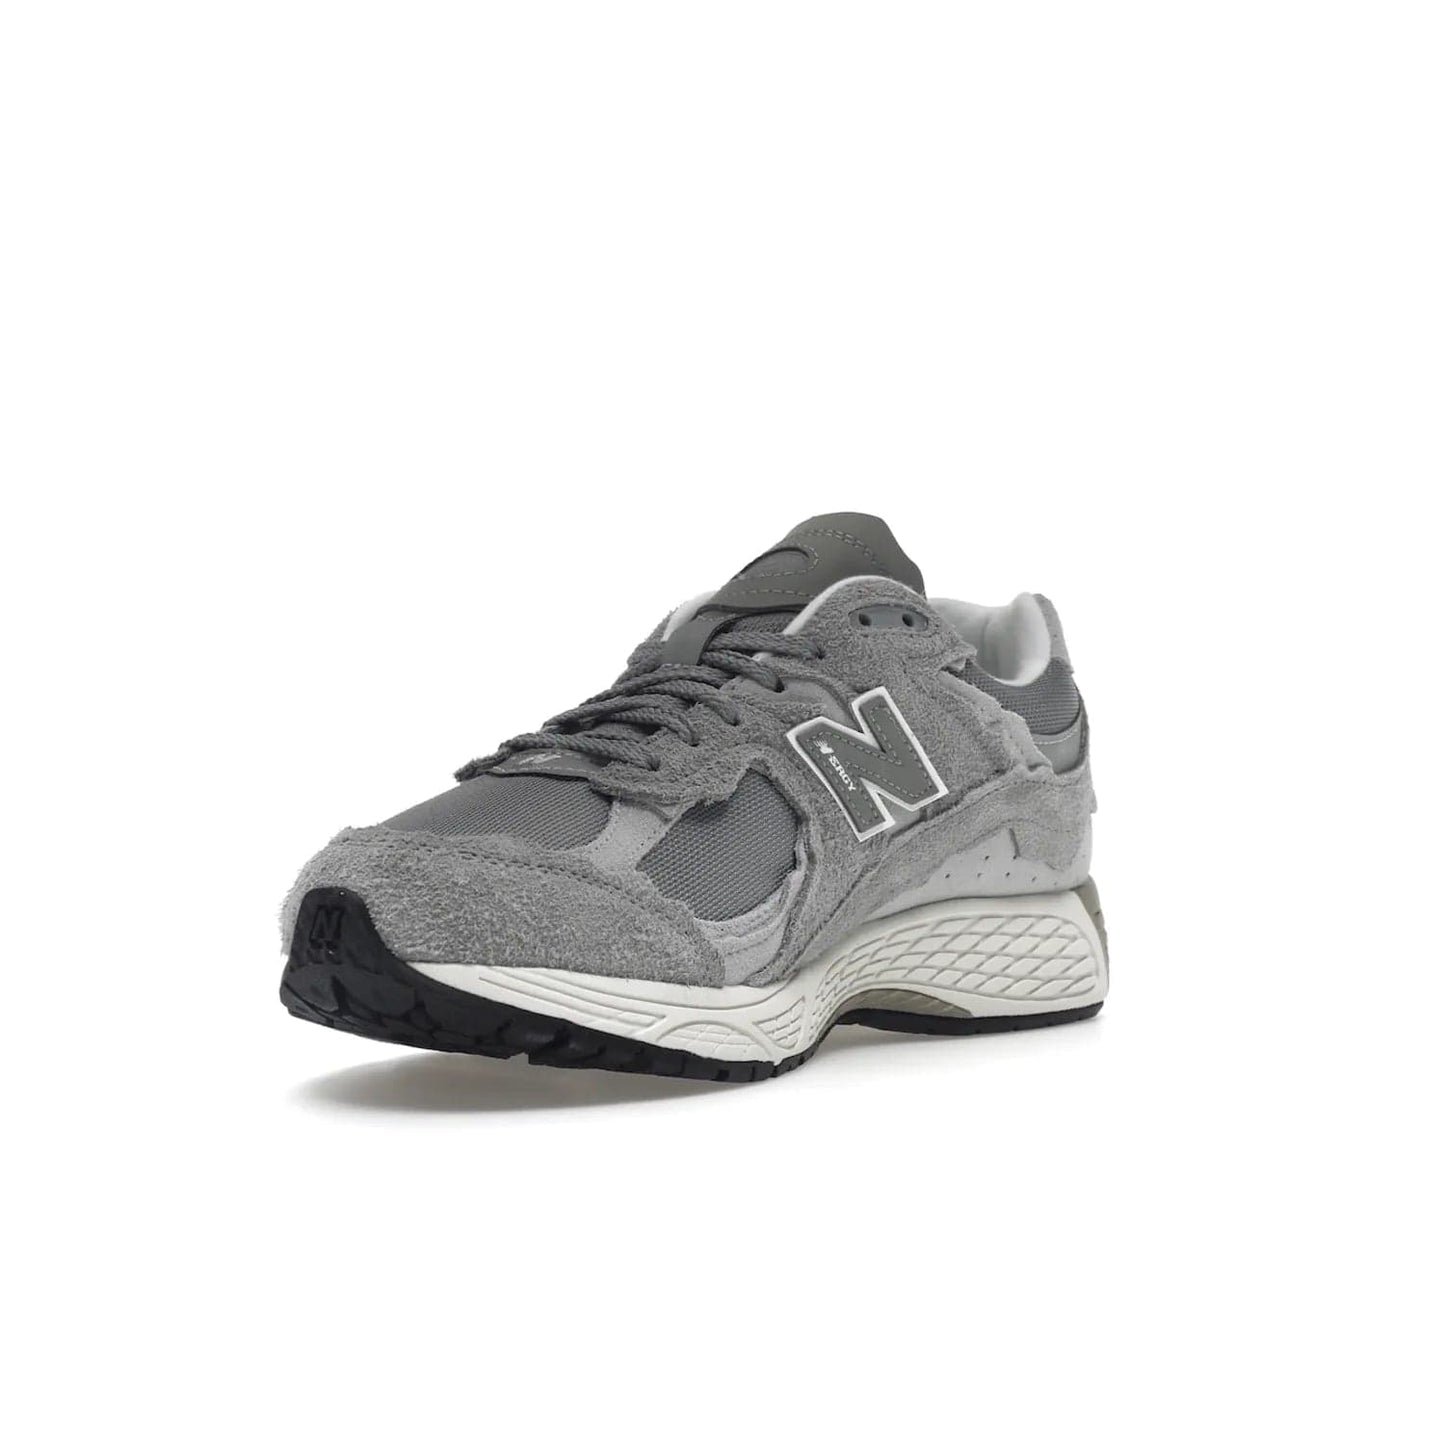 New Balance 2002R Protection Pack Grey - Image 14 - Only at www.BallersClubKickz.com - The New Balance 2002R Protection Pack Grey provides superior protection and all-day comfort. It features a blend of synthetic and mesh materials, foam midsole, rubber outsole, and a toe cap and heel counter. Show off the classic "N" logo and "2002R" lettering. Get a pair on February 14, 2023 for protection and style.